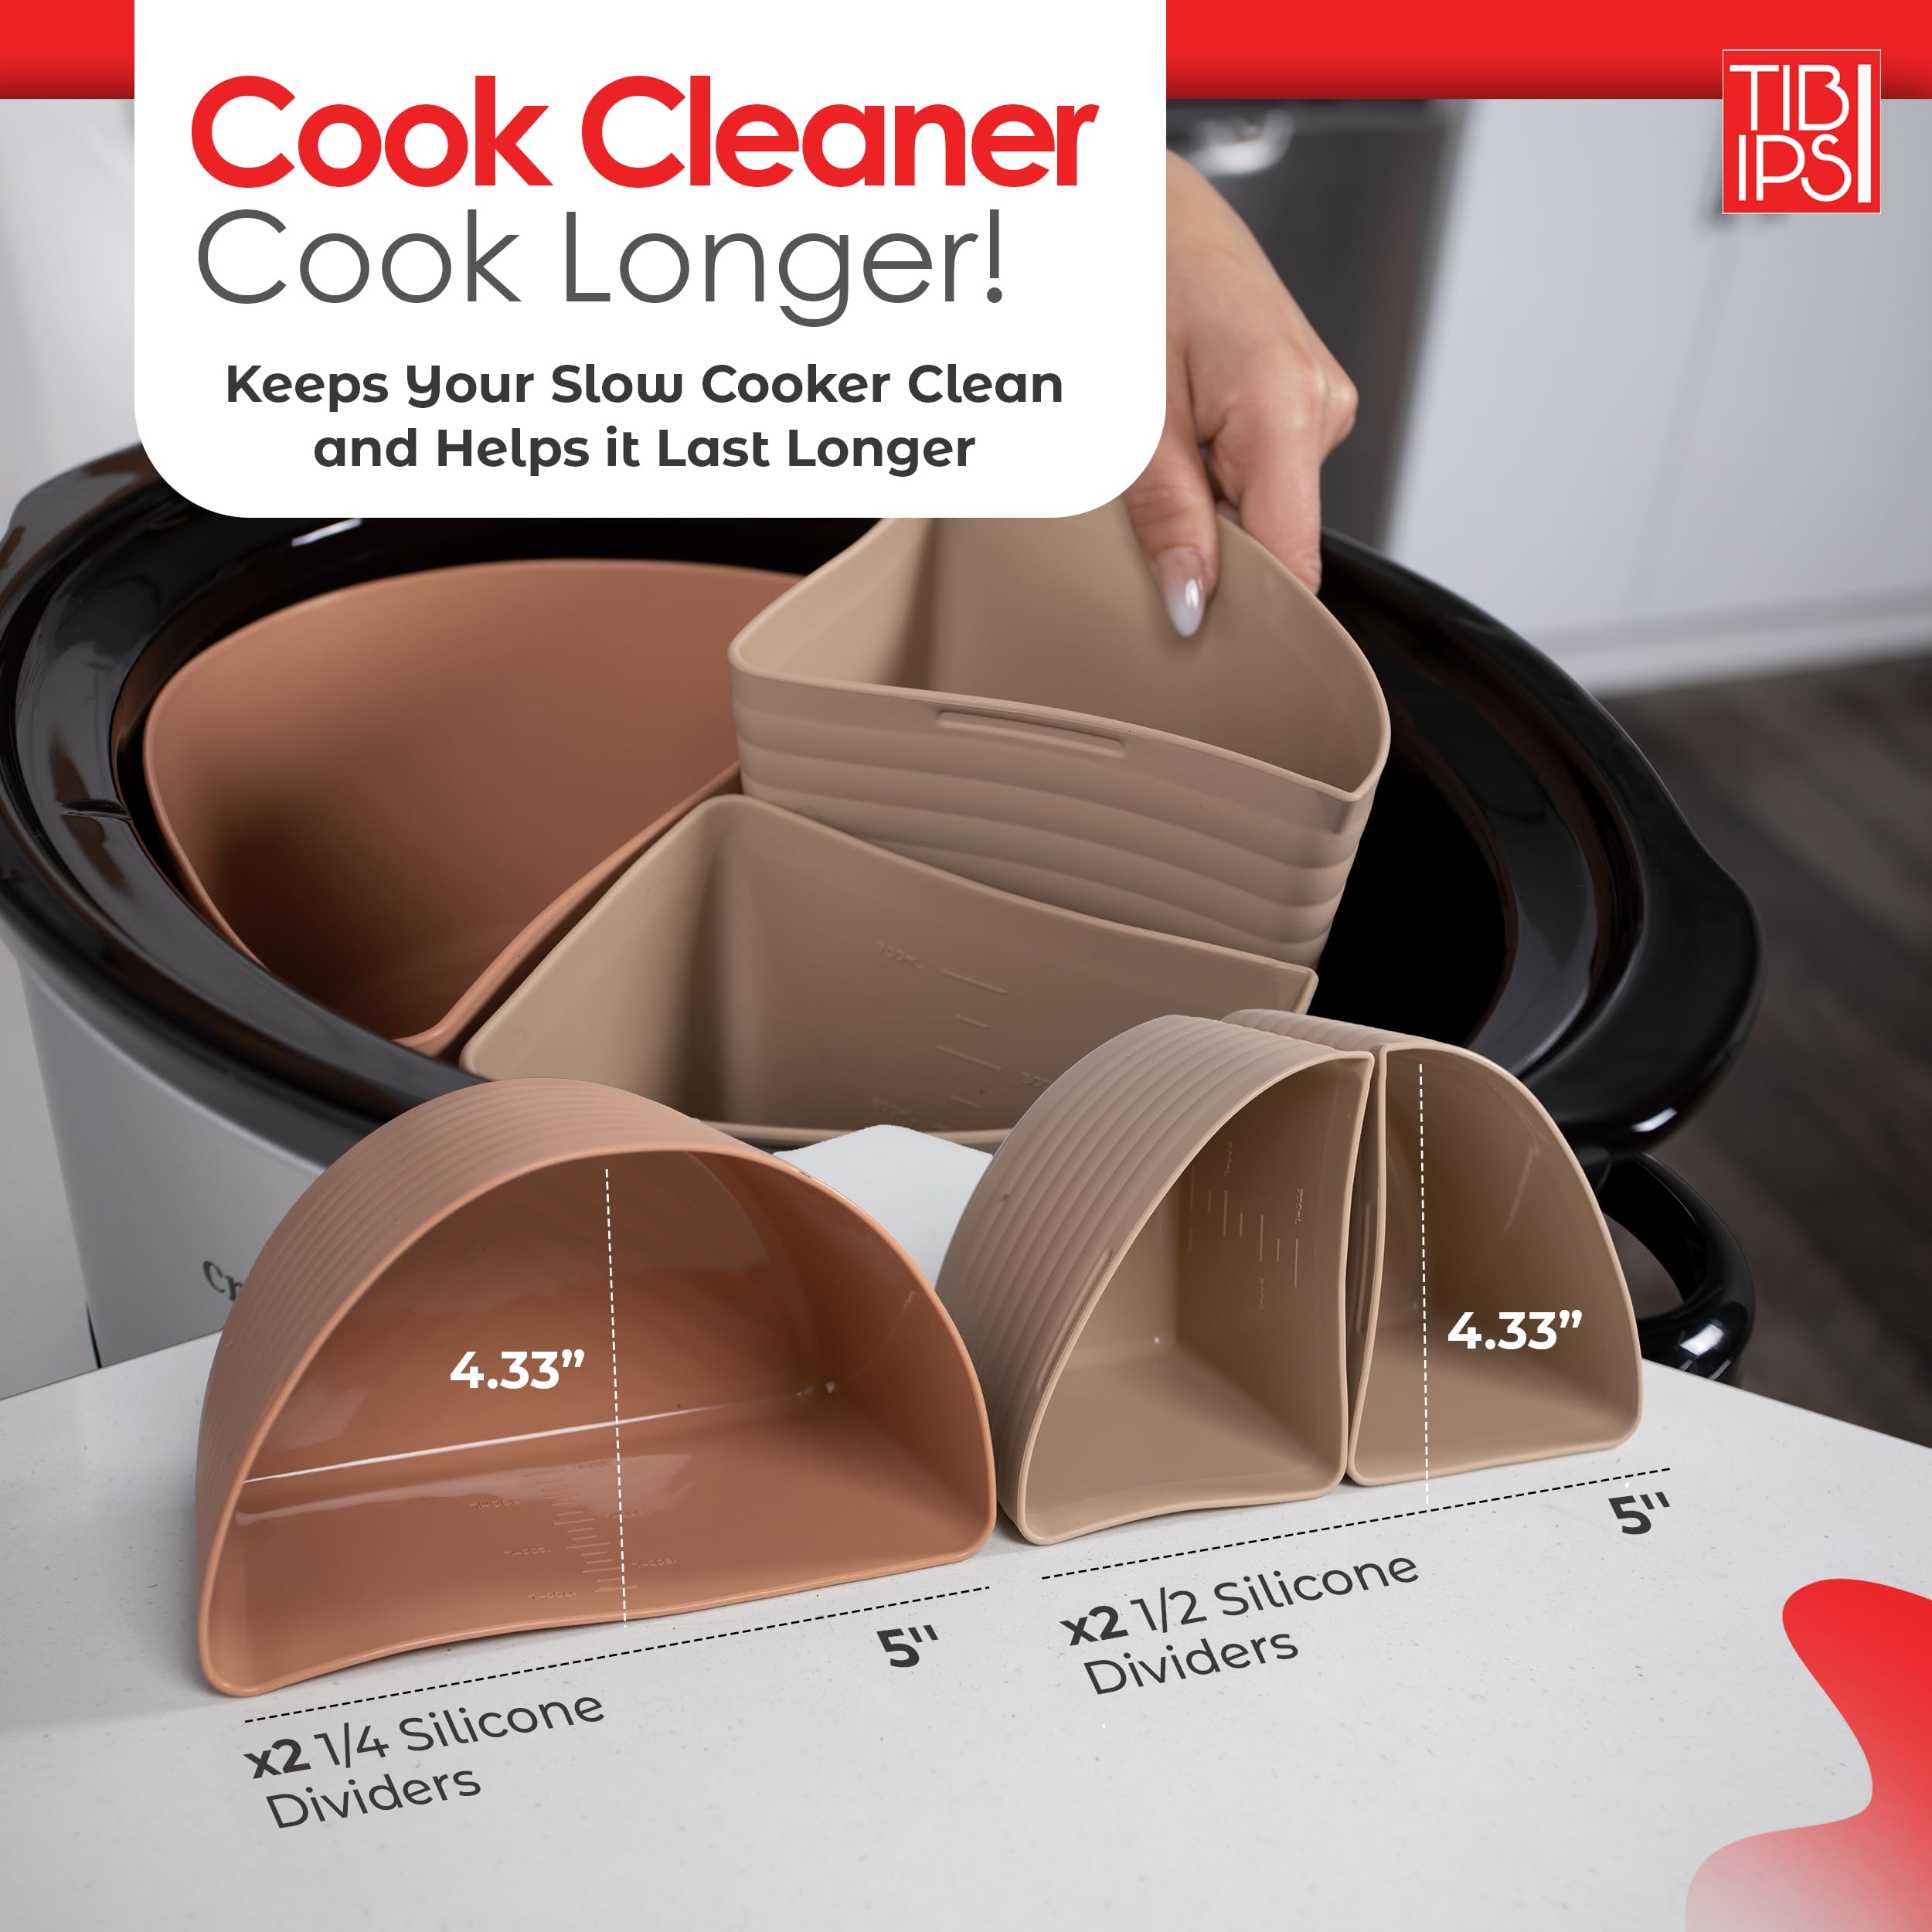 Tibi Ipsi Silicone Crockpot Liner for 6qt Slow Cookers - Reusable & Leak-Proof Slow Cooker Liner, Crockpot Silicone Liner Includes Baking Mat & Silicone Spoon with Wooden Ladle